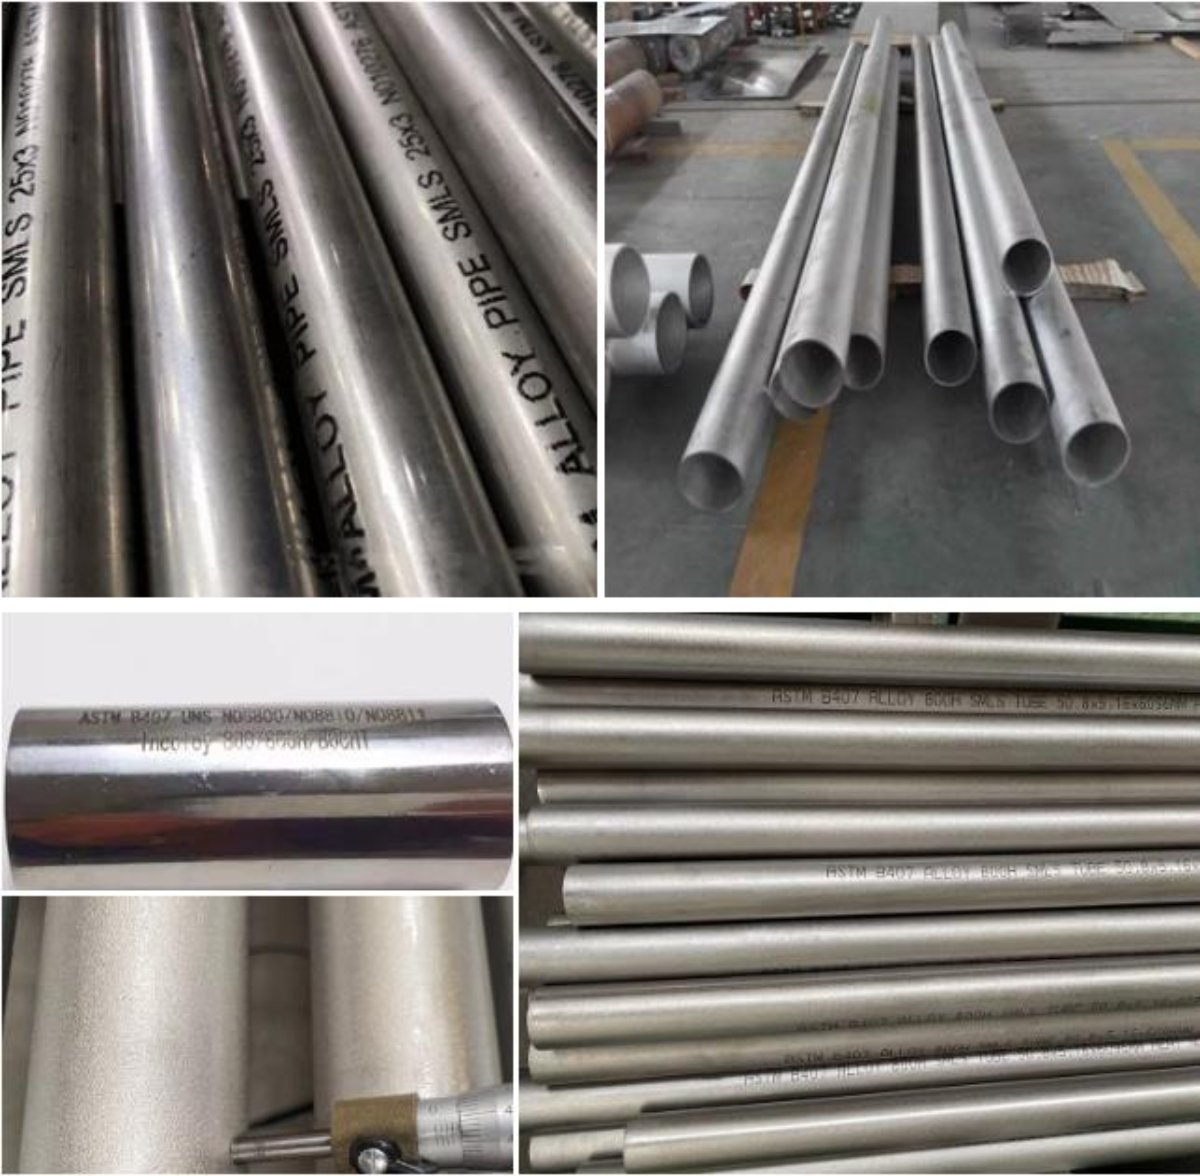 Details of Inconel alloy seamless pipe tubes